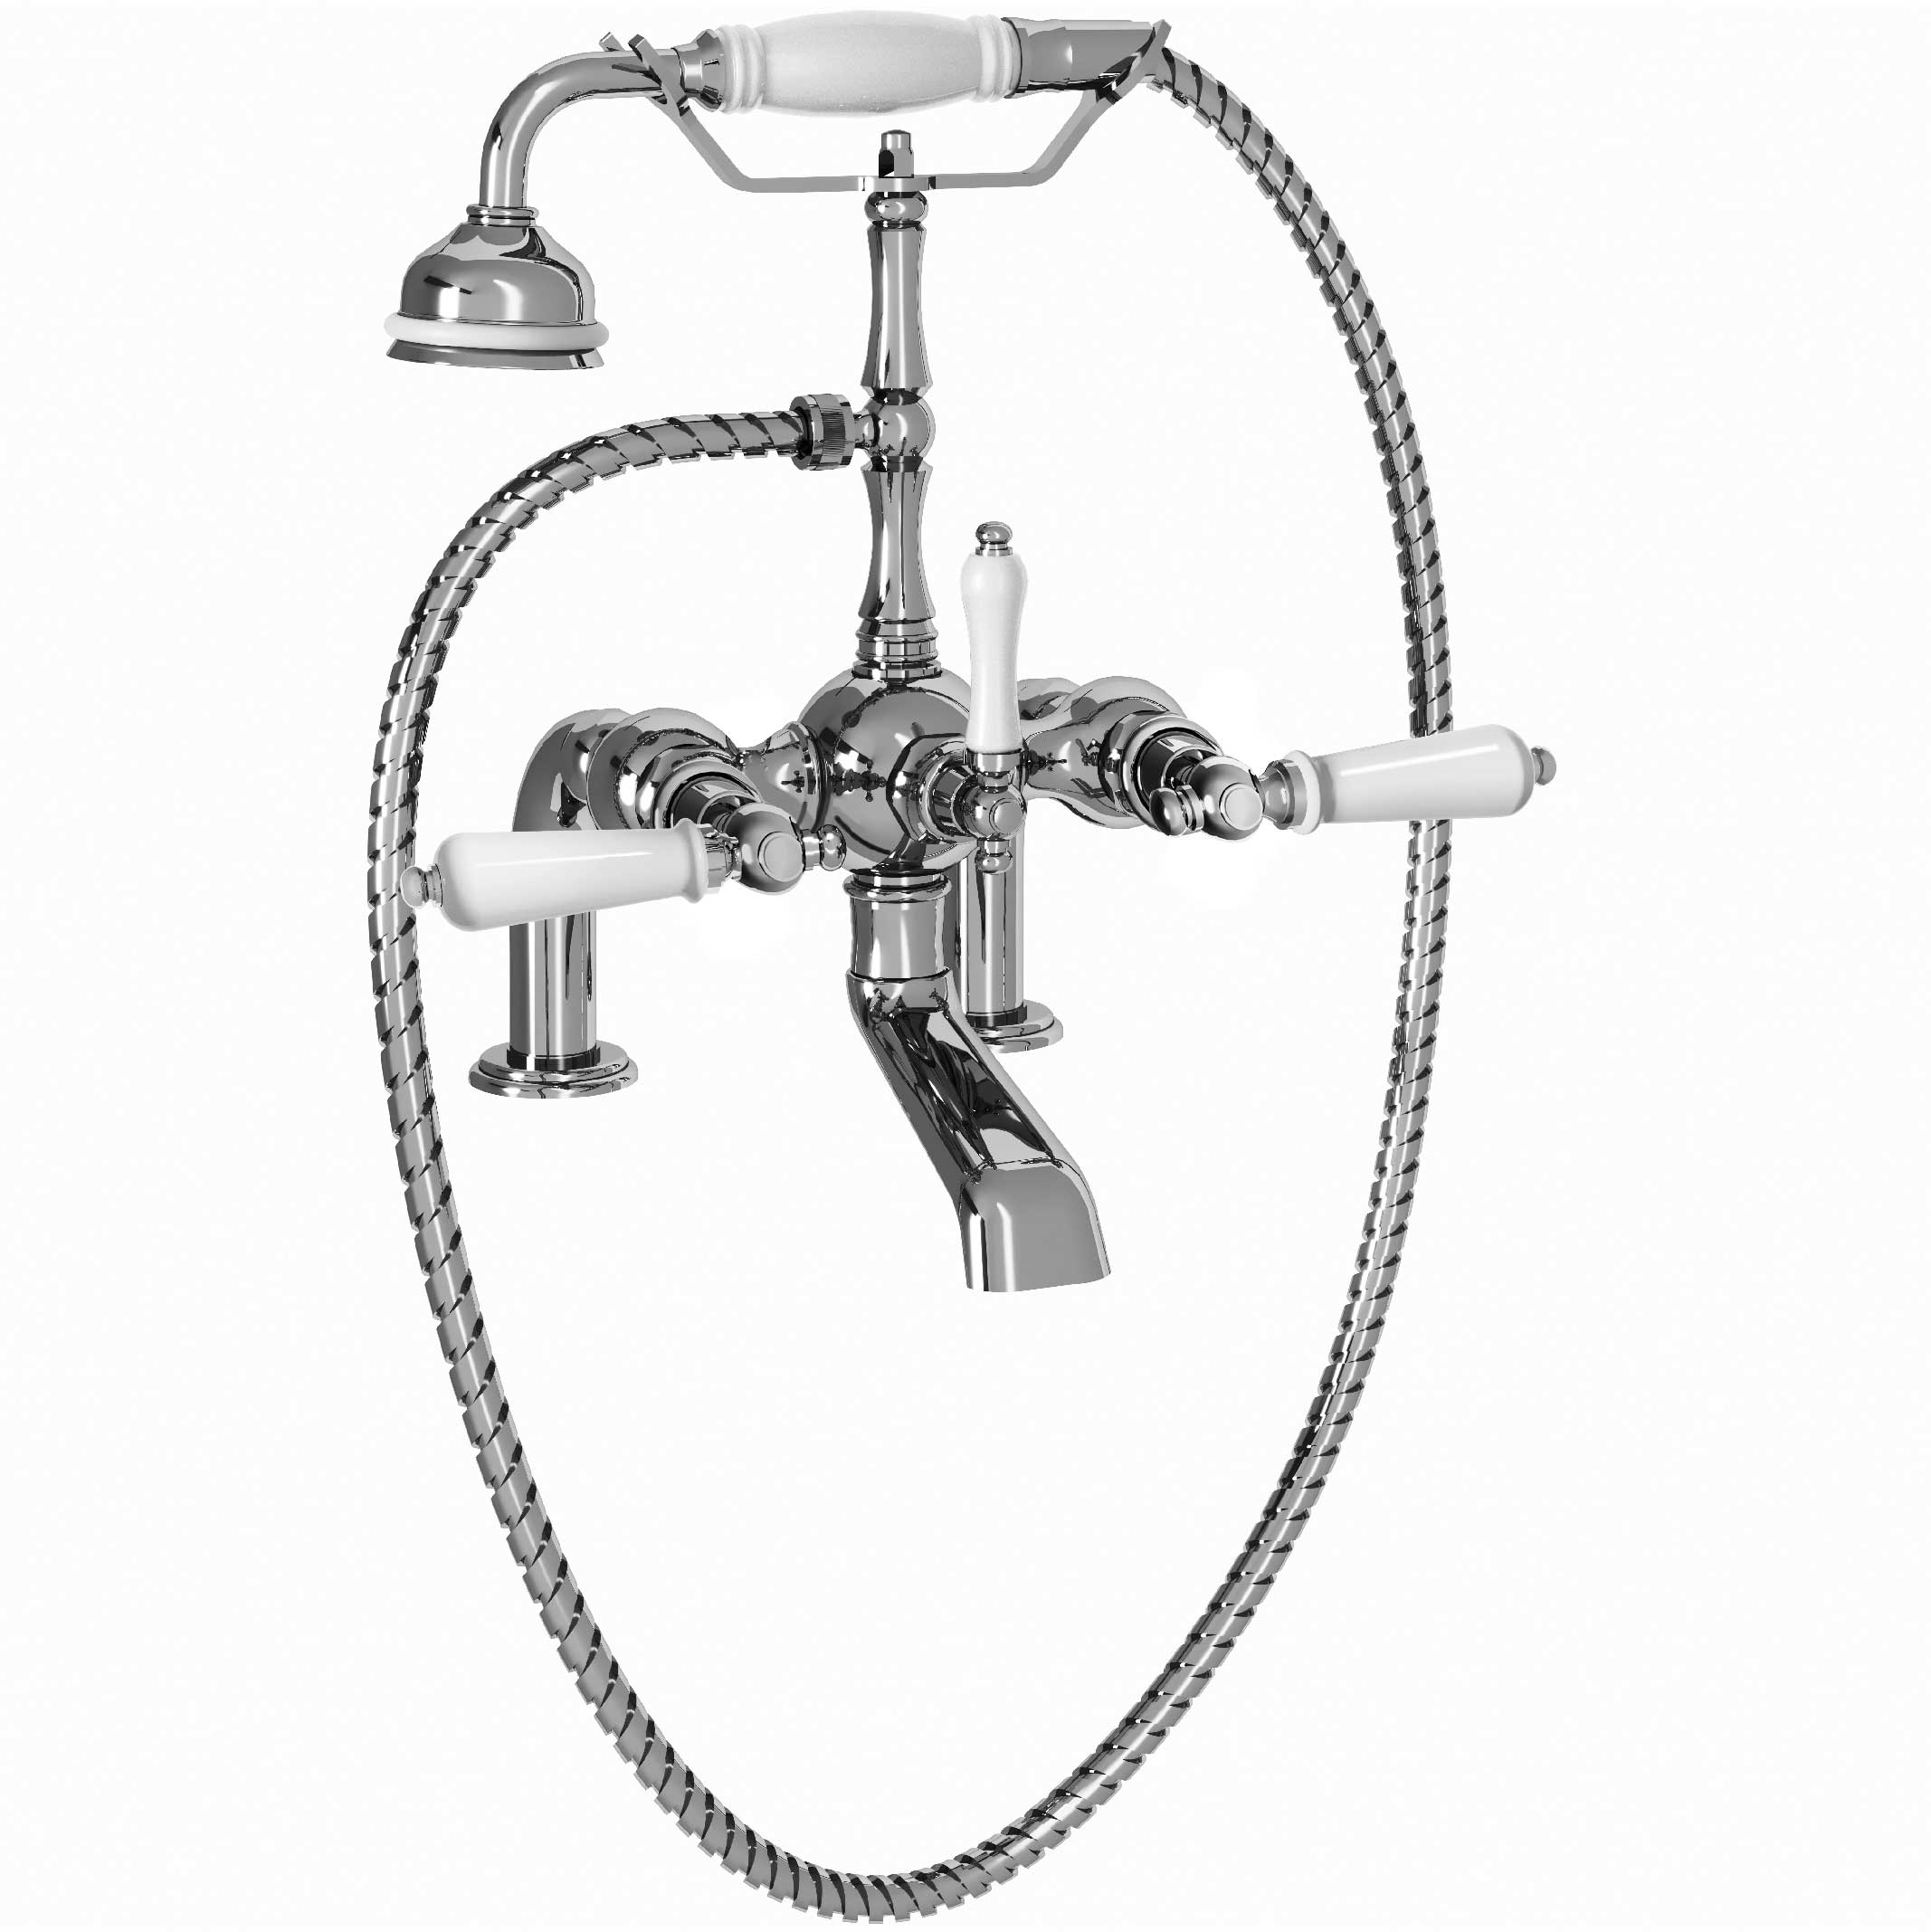 M04-3306 Rim mounted bath and shower mixer